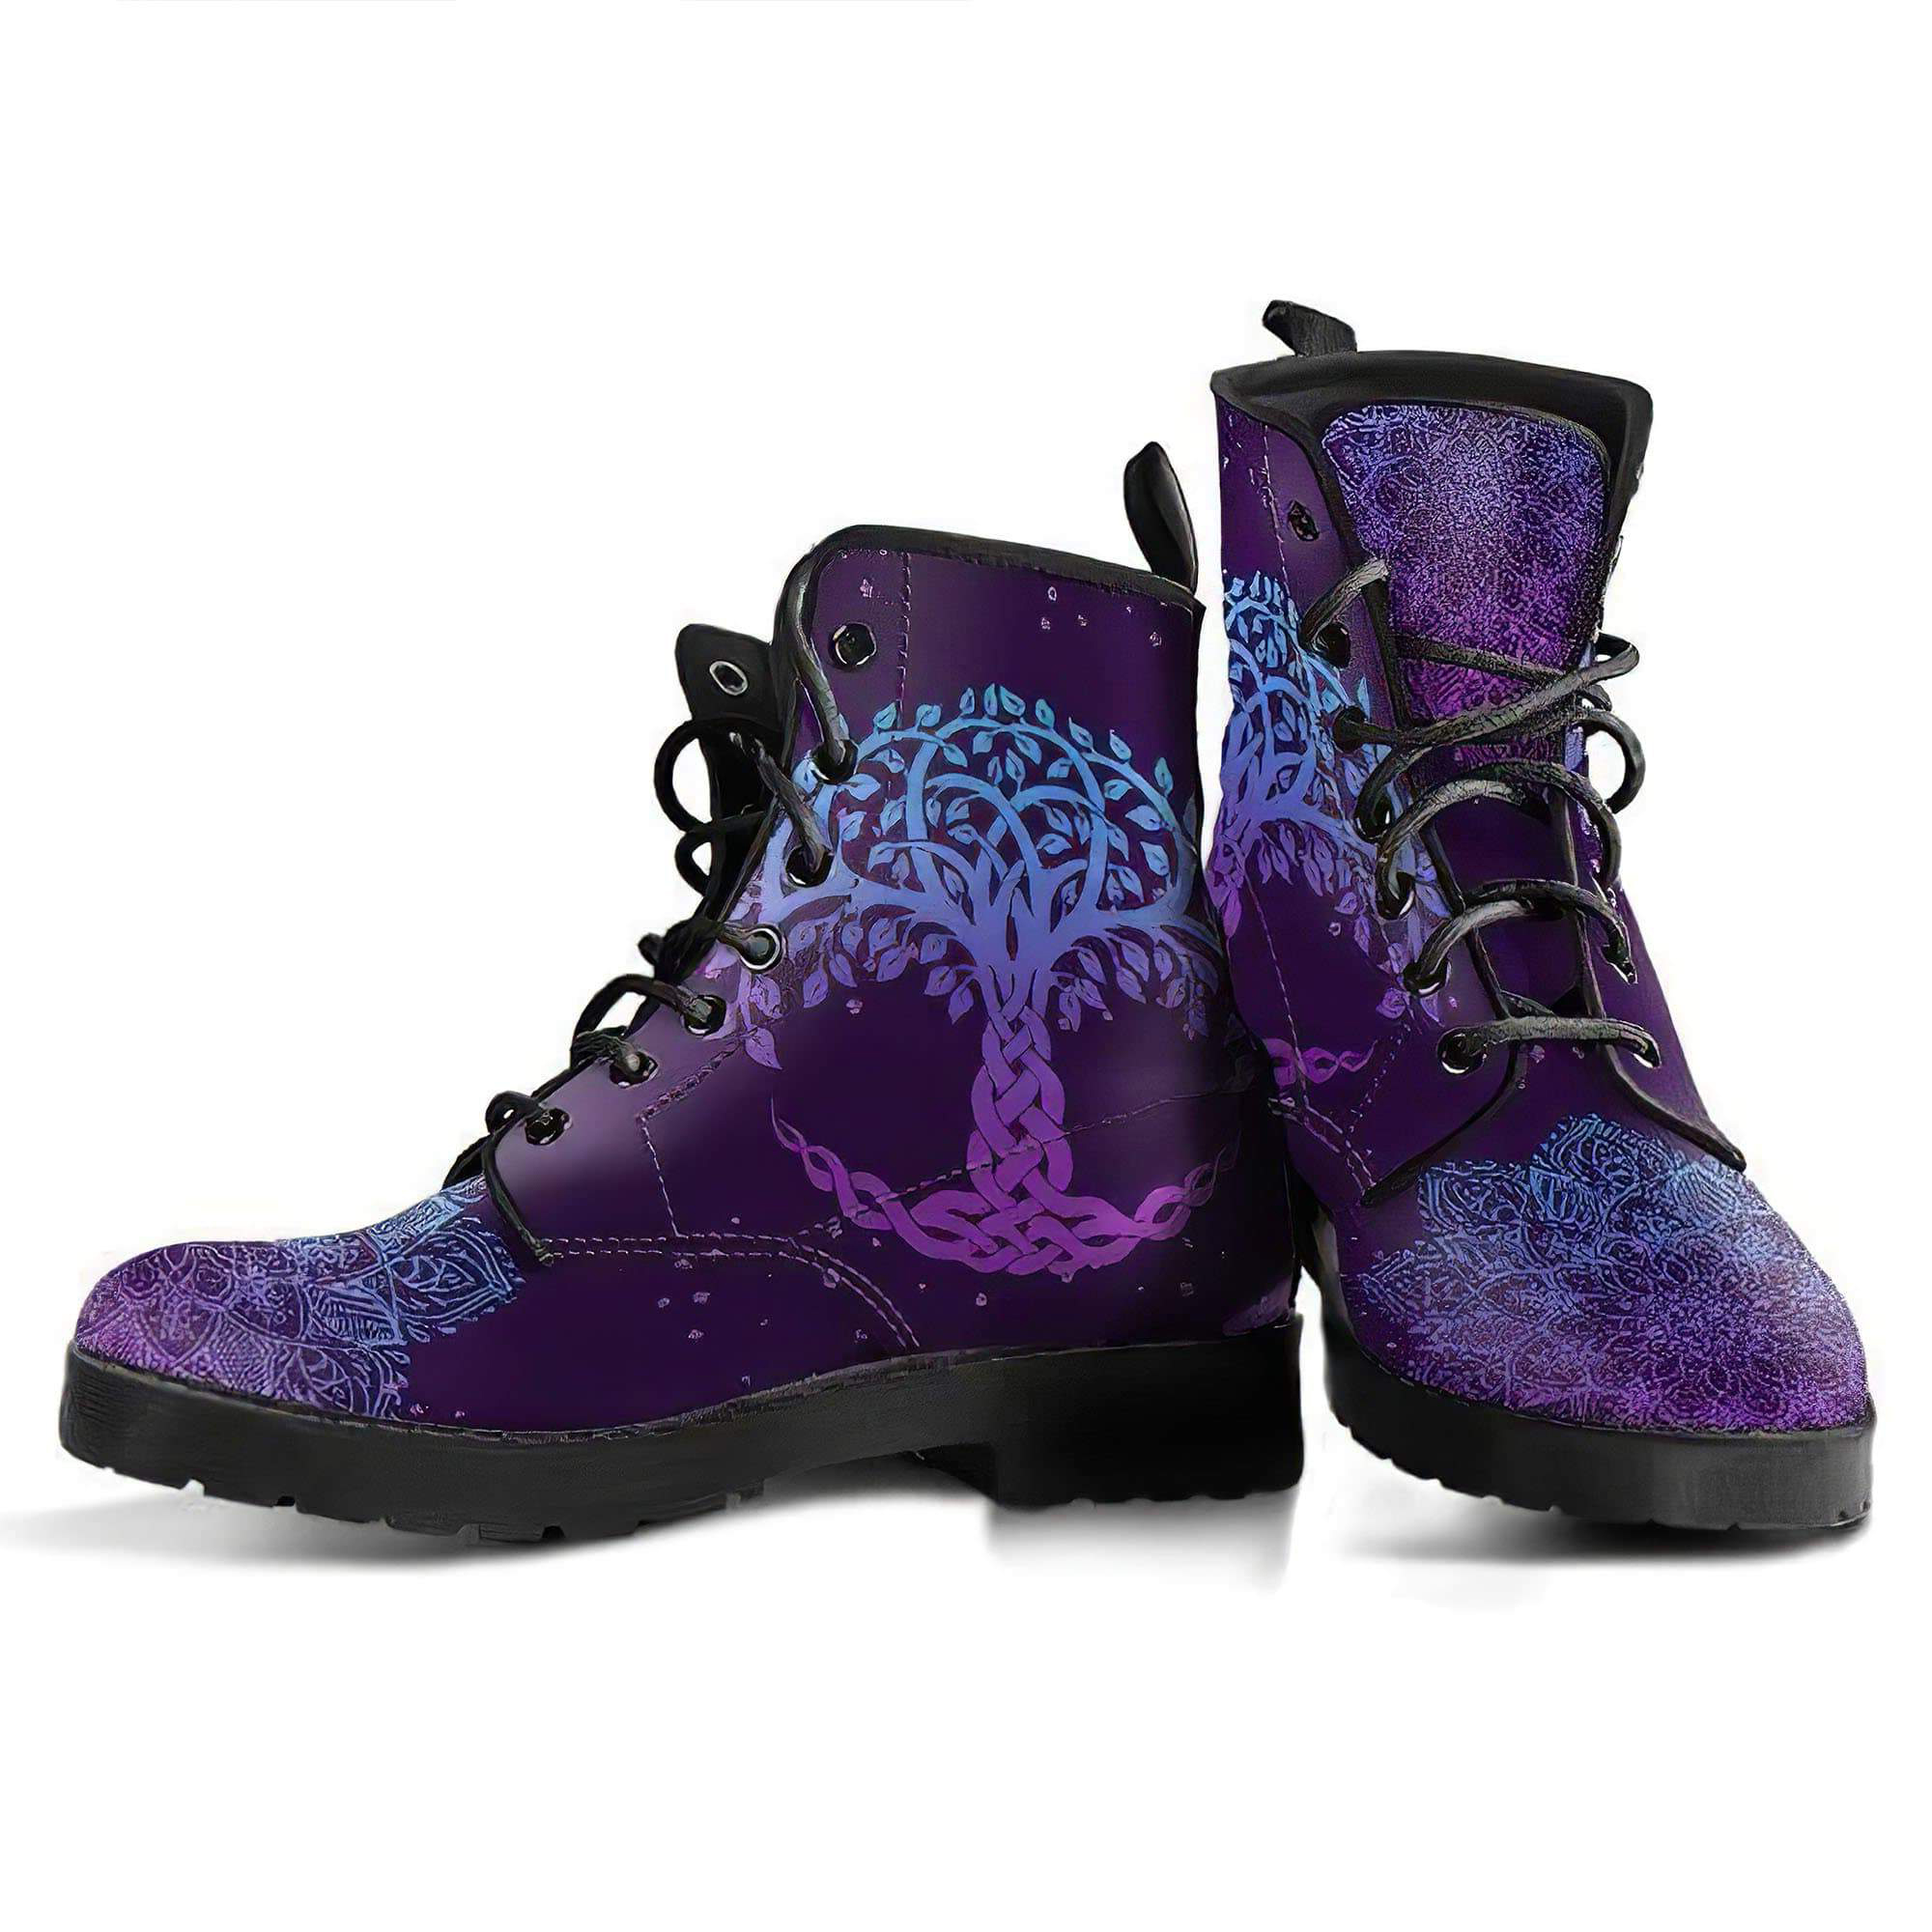 purple-tree-of-life-handcrafted-boots-women-s-leather-boots-12051940933693.jpg